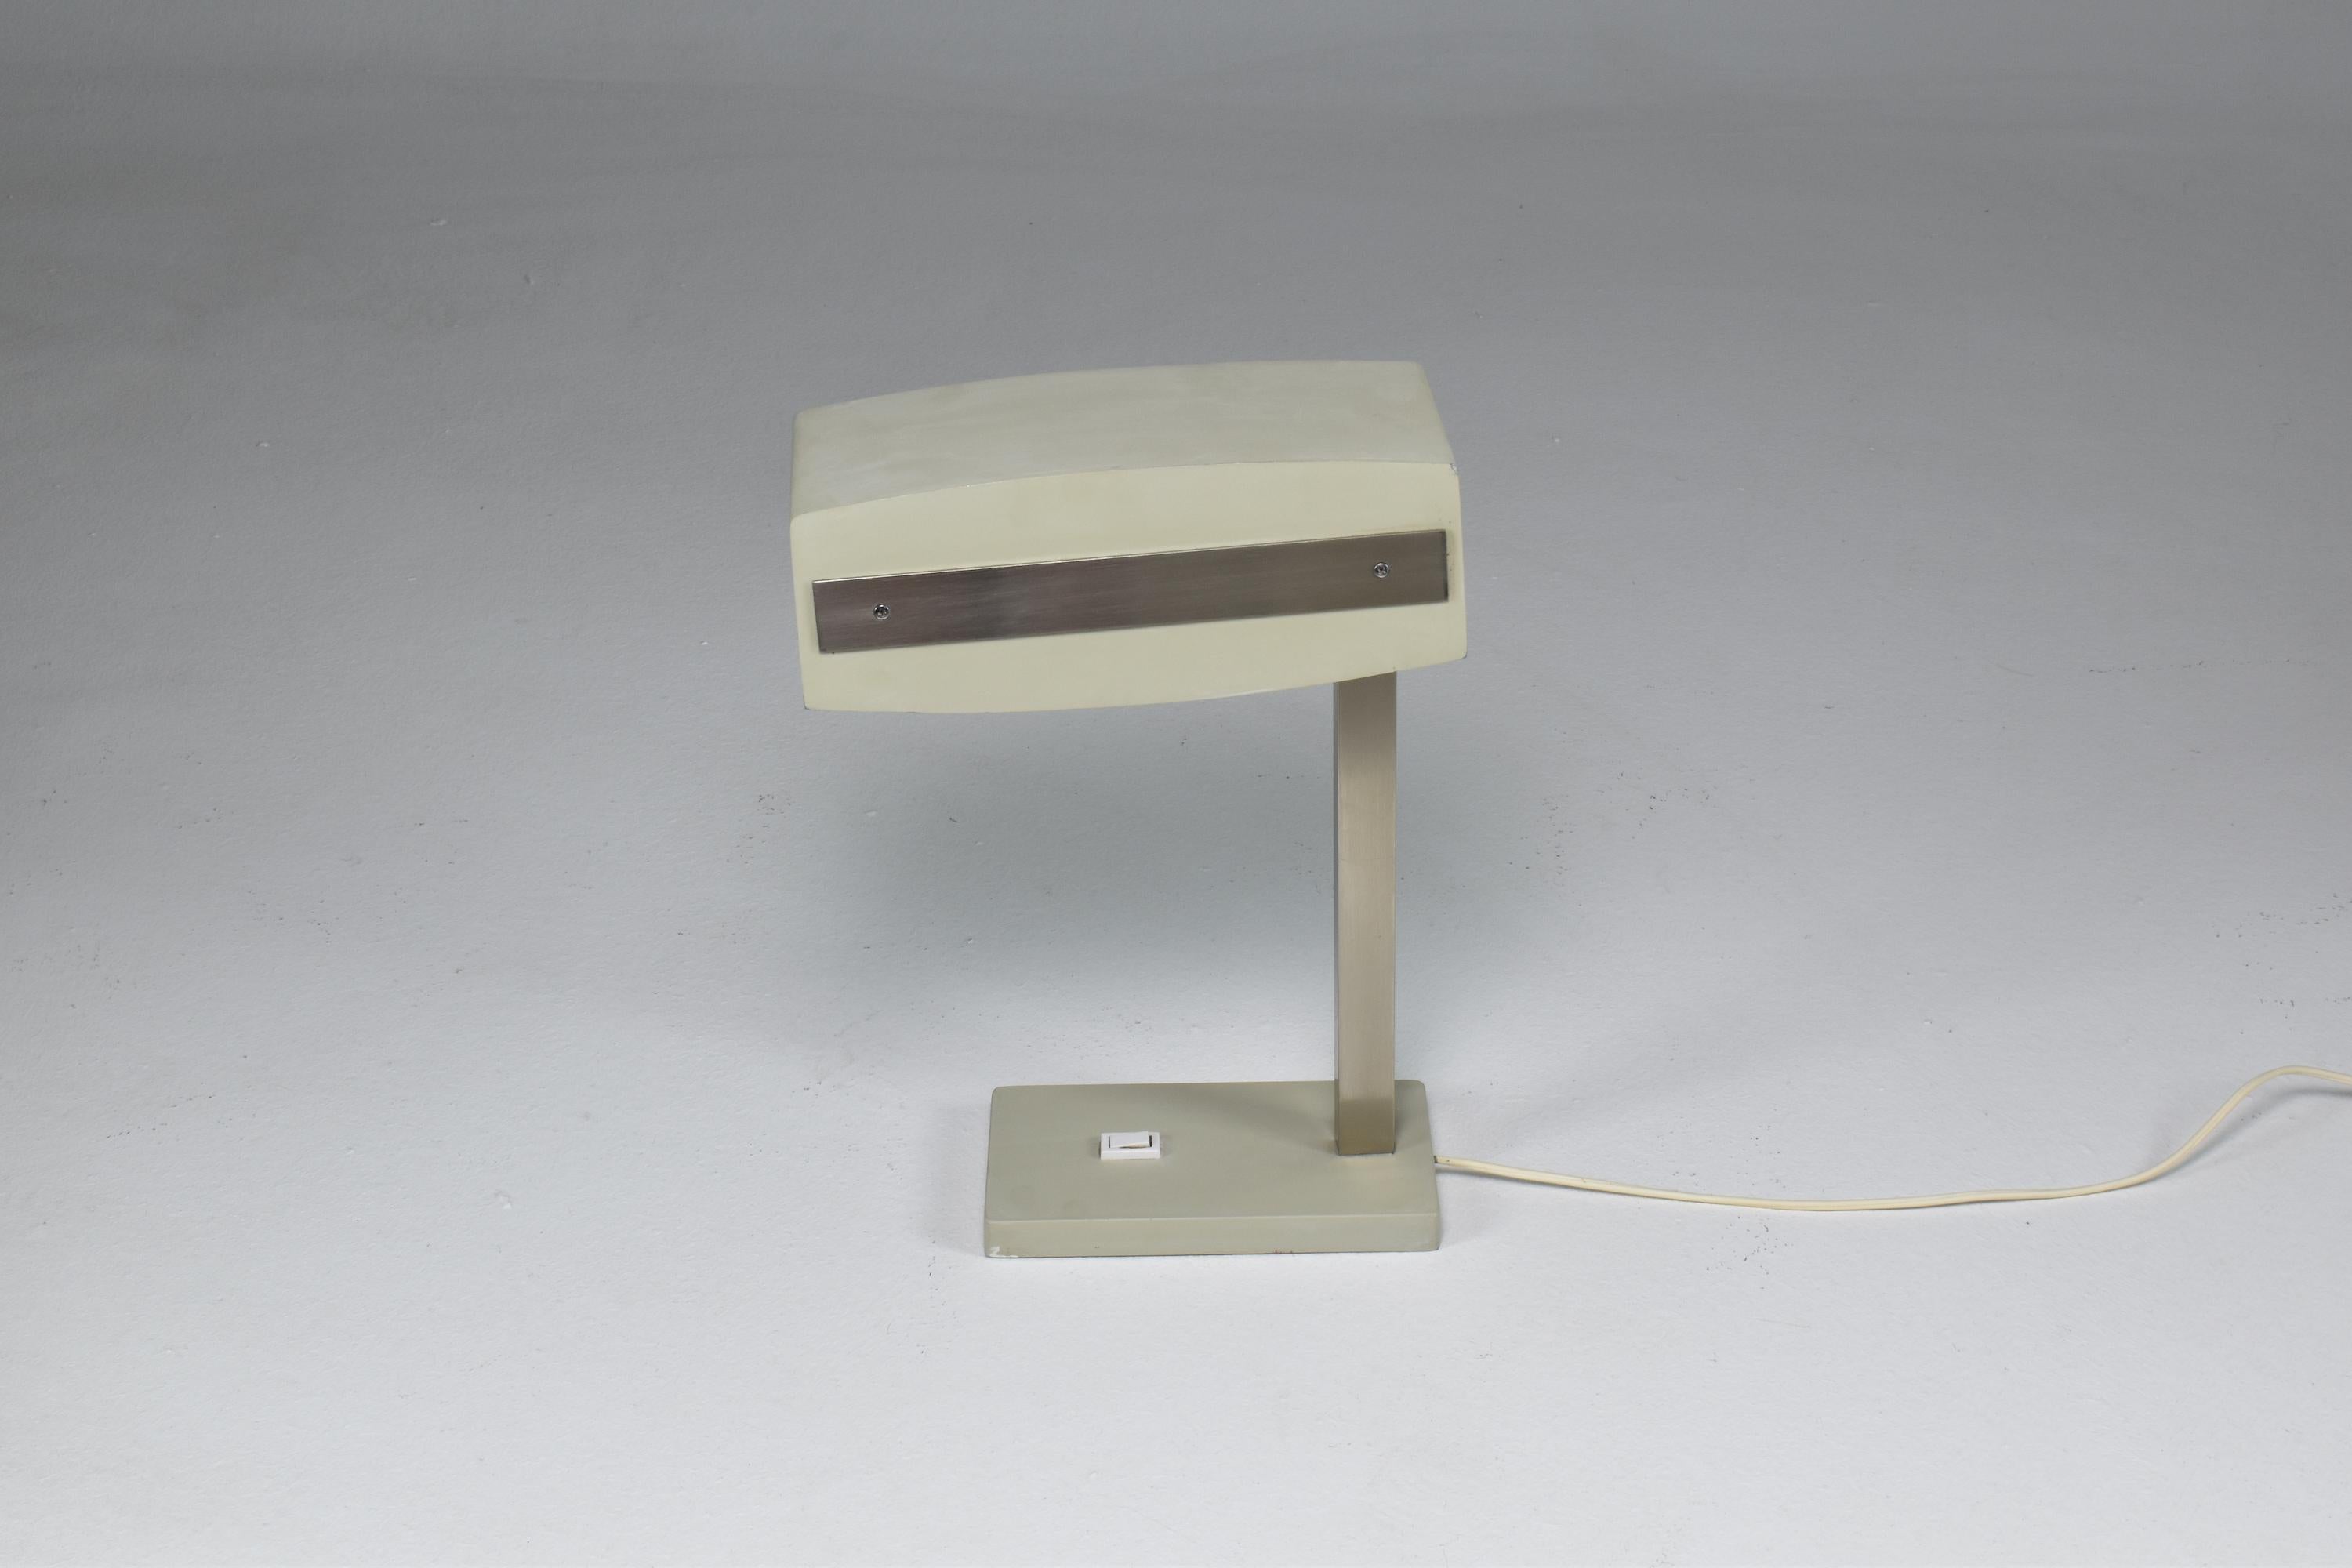 A 1960s-1970's desk lamp by the iconic collectible Italian manufacturer Stilnovo. This mid-century design is composed of a rectangular-shaped base with a light switch in a painted light grey color that matched the shade. This almost robotic design